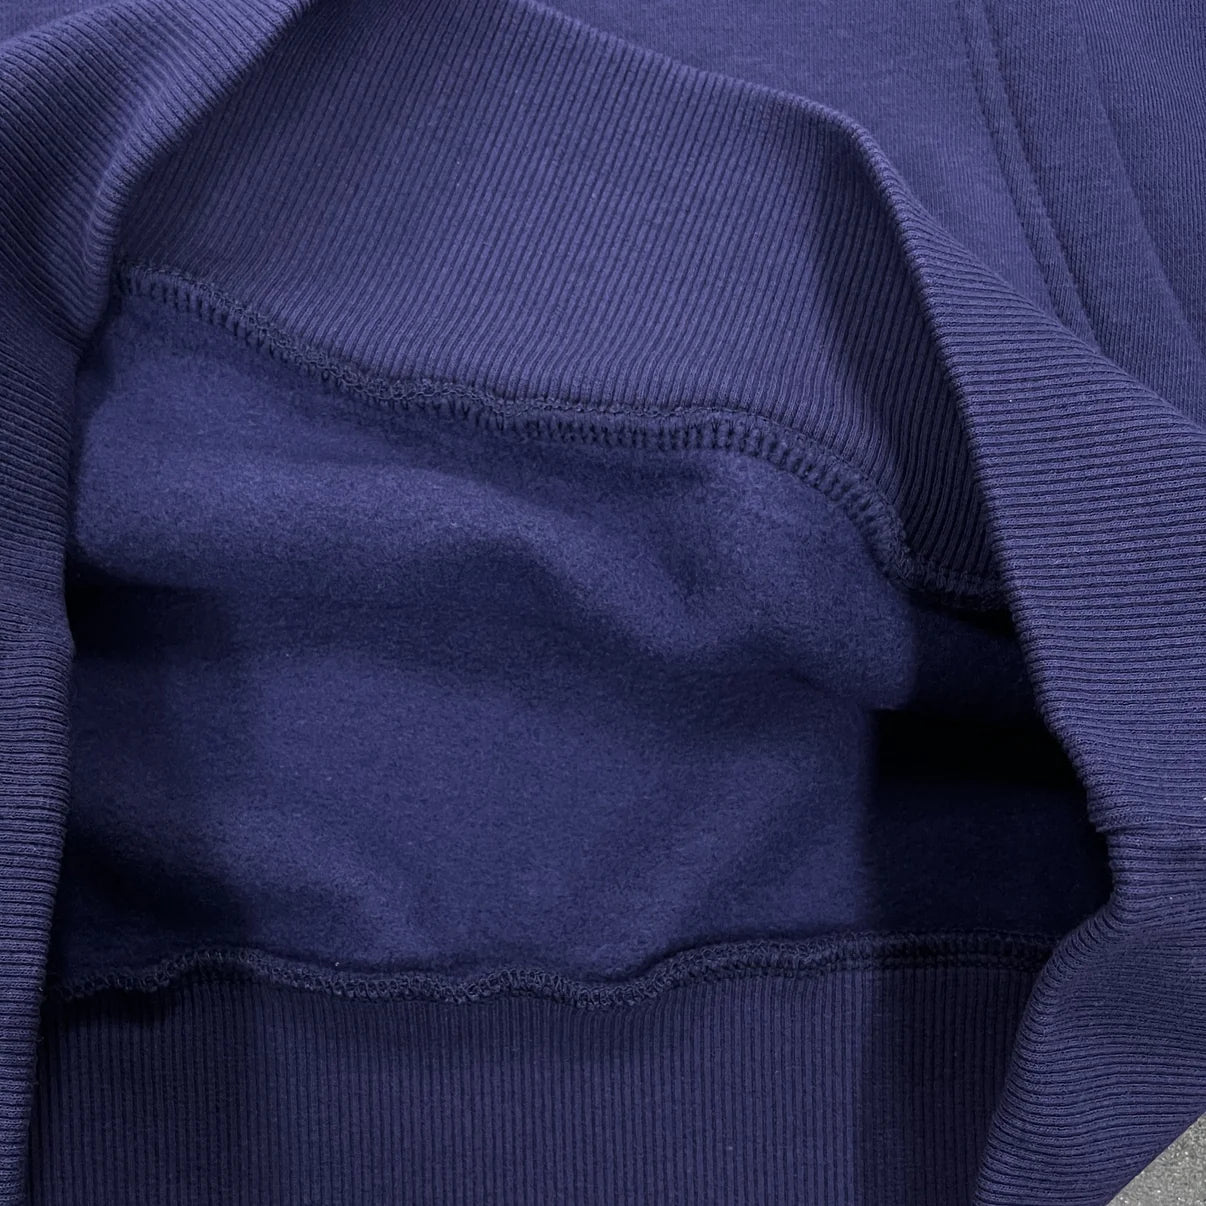 TS CHENILLE DECDODED2.0 HOODIE TRACKSUIT -MEDIEVAL BLUE